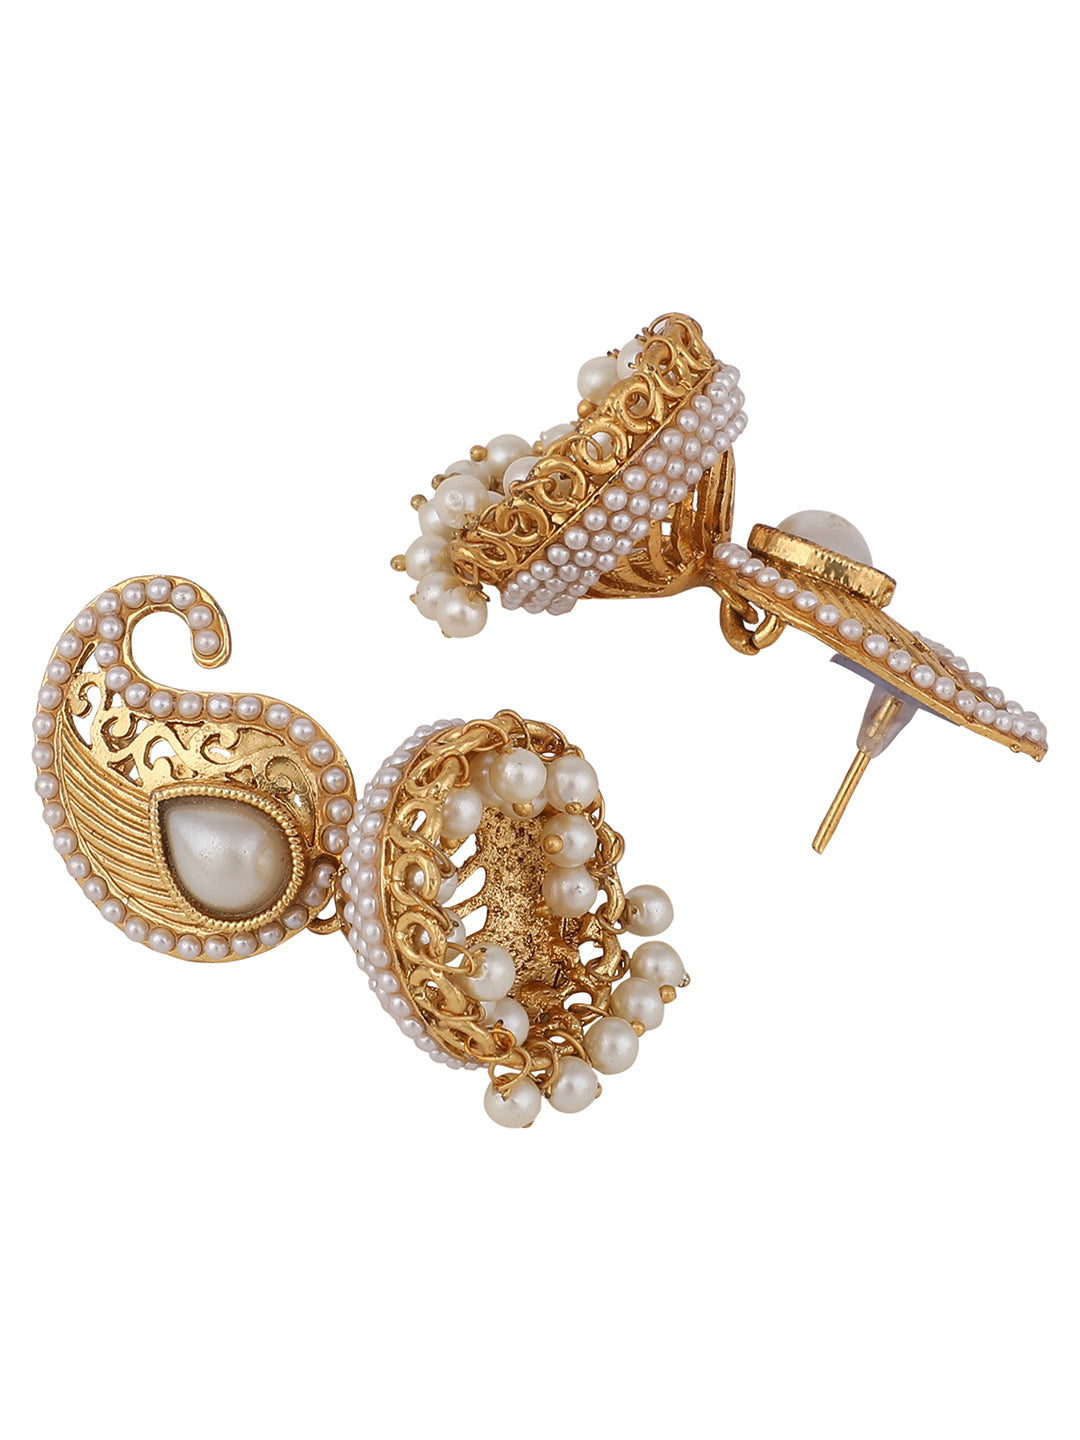 Women's Traditional Carry Shaped Pearl Offwhite Brass Jhumka Earring - Anikas Creation